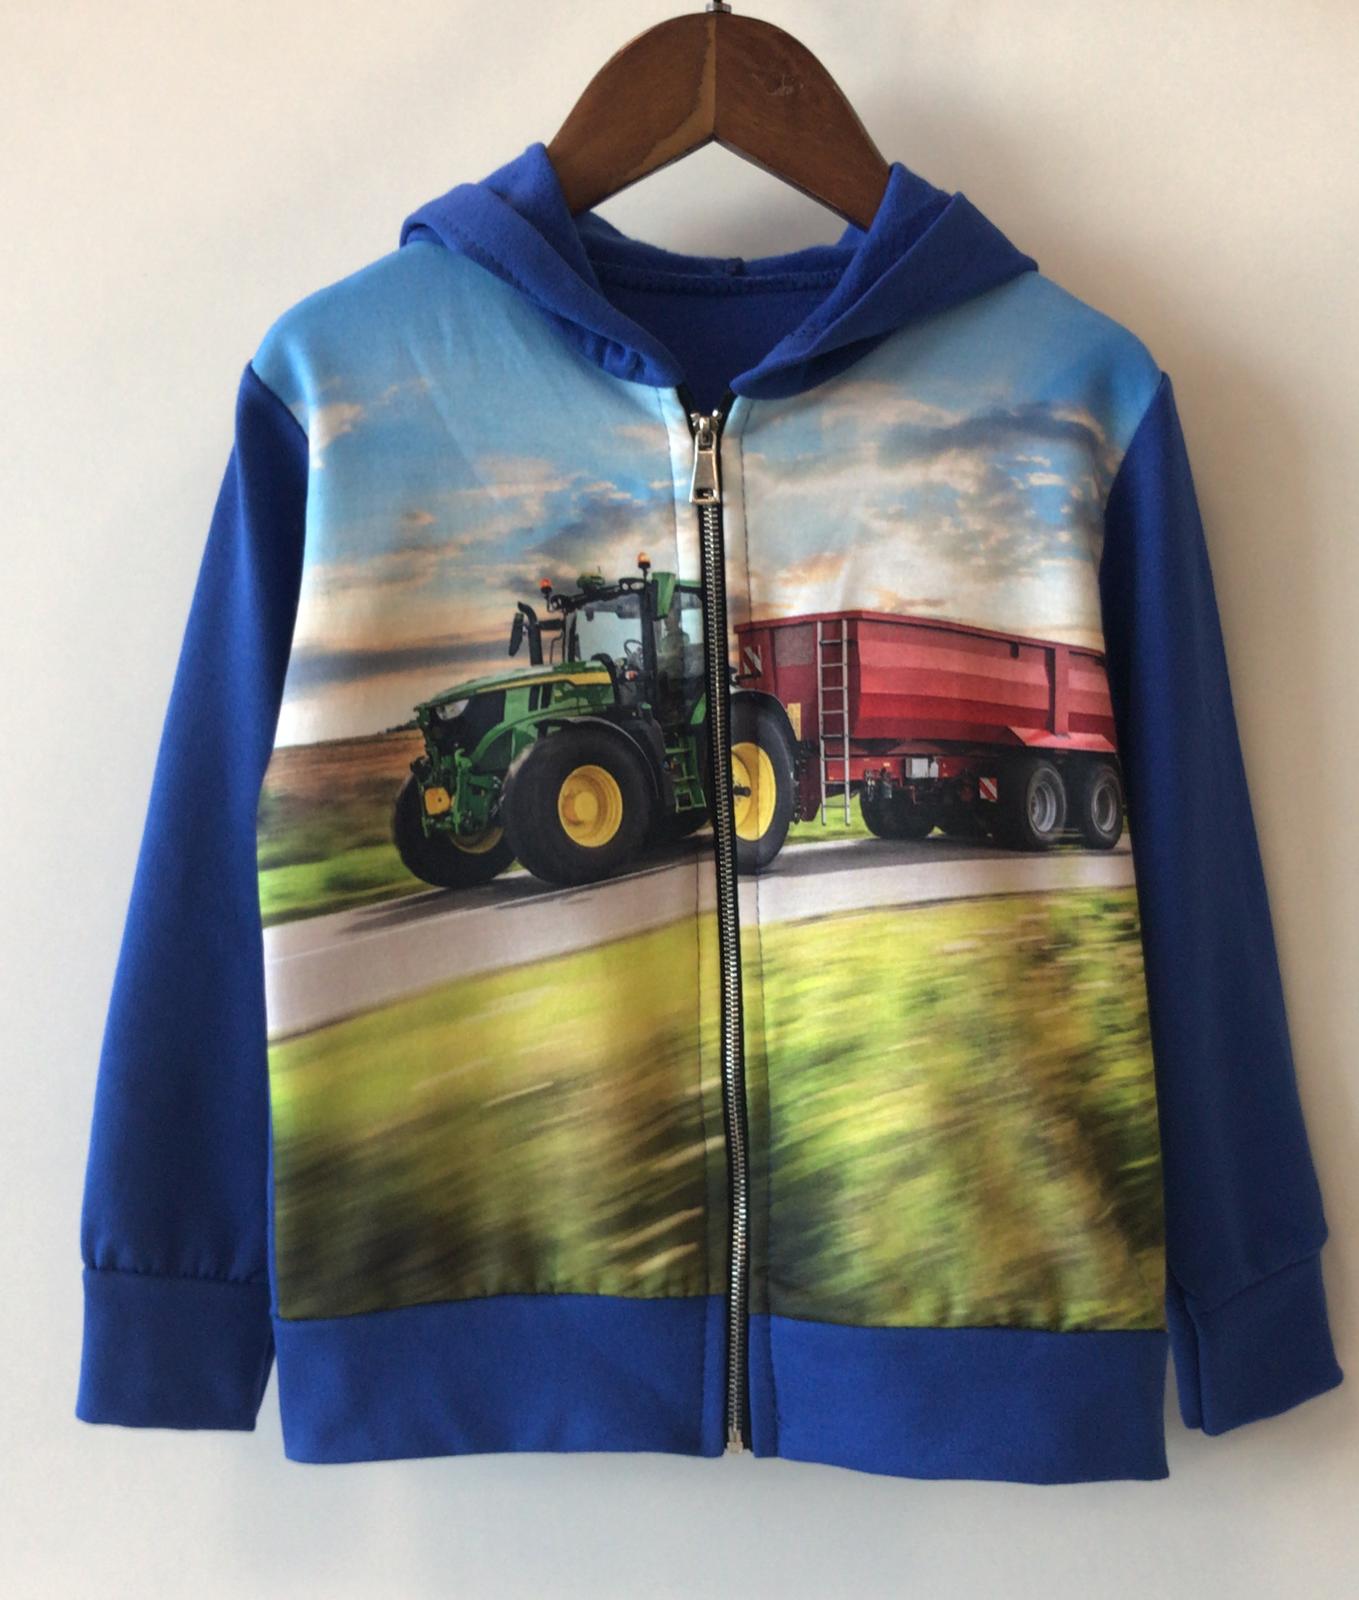 Cardigan with John Deere and tipper